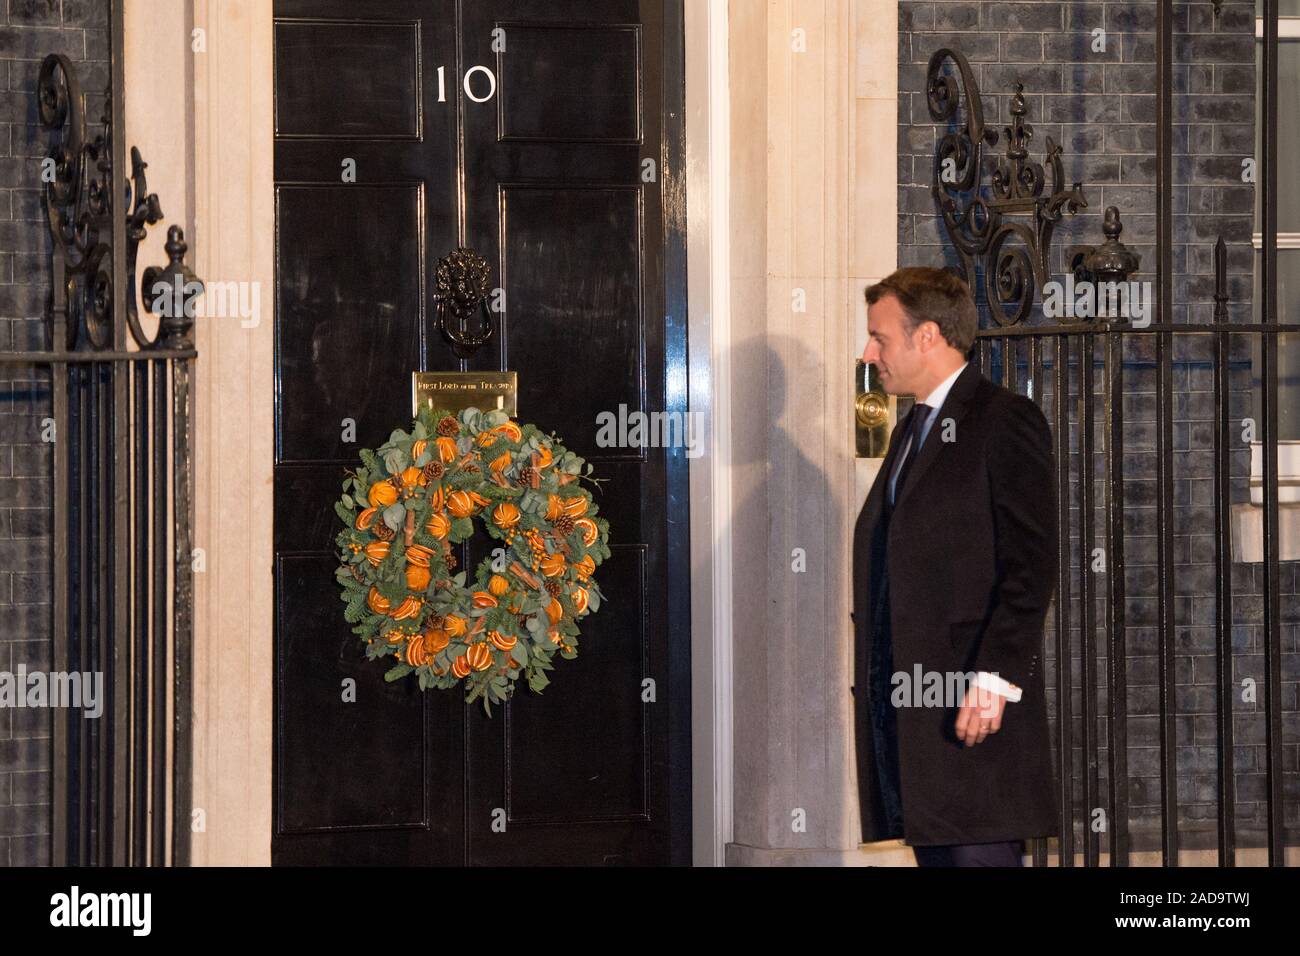 London, UK. 3 December 2019.  Pictured: Emmanuel Macron - President of France. Boris Johnson, UK Prime Minister hosts a reception with foreign leaders ahead of the NATO (North Atlantic Treaty Organisation) meeting on the 4th December. Credit: Colin Fisher/Alamy Live News. Stock Photo